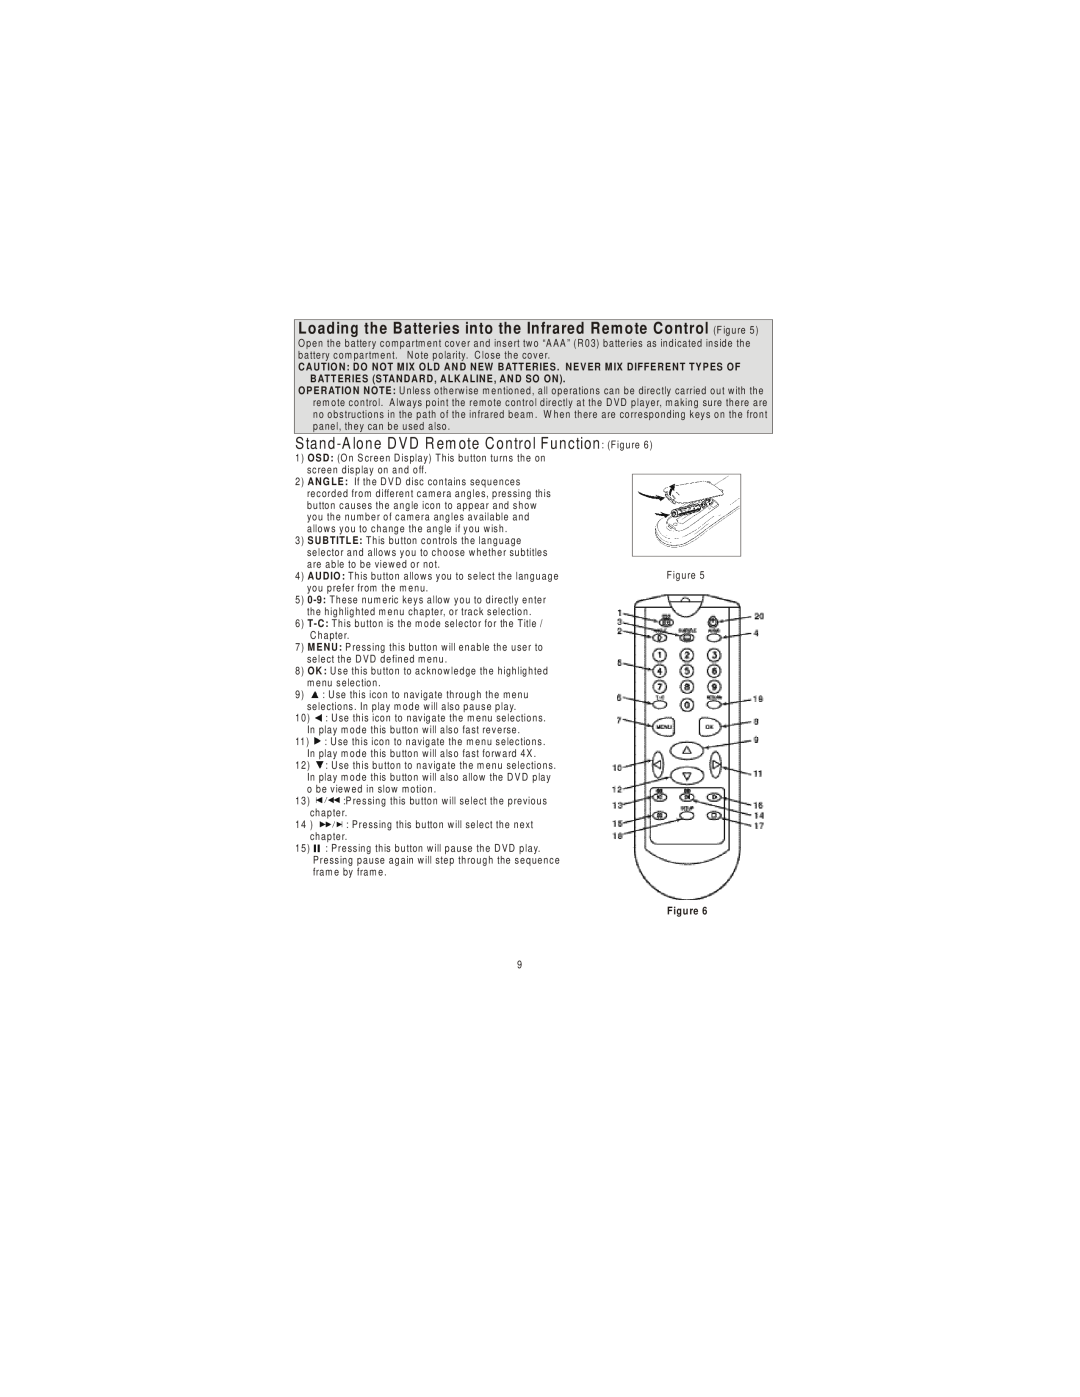 Audiovox 3200 owner manual Loading the Batteries into the Infrared Rem ote Control F igure 